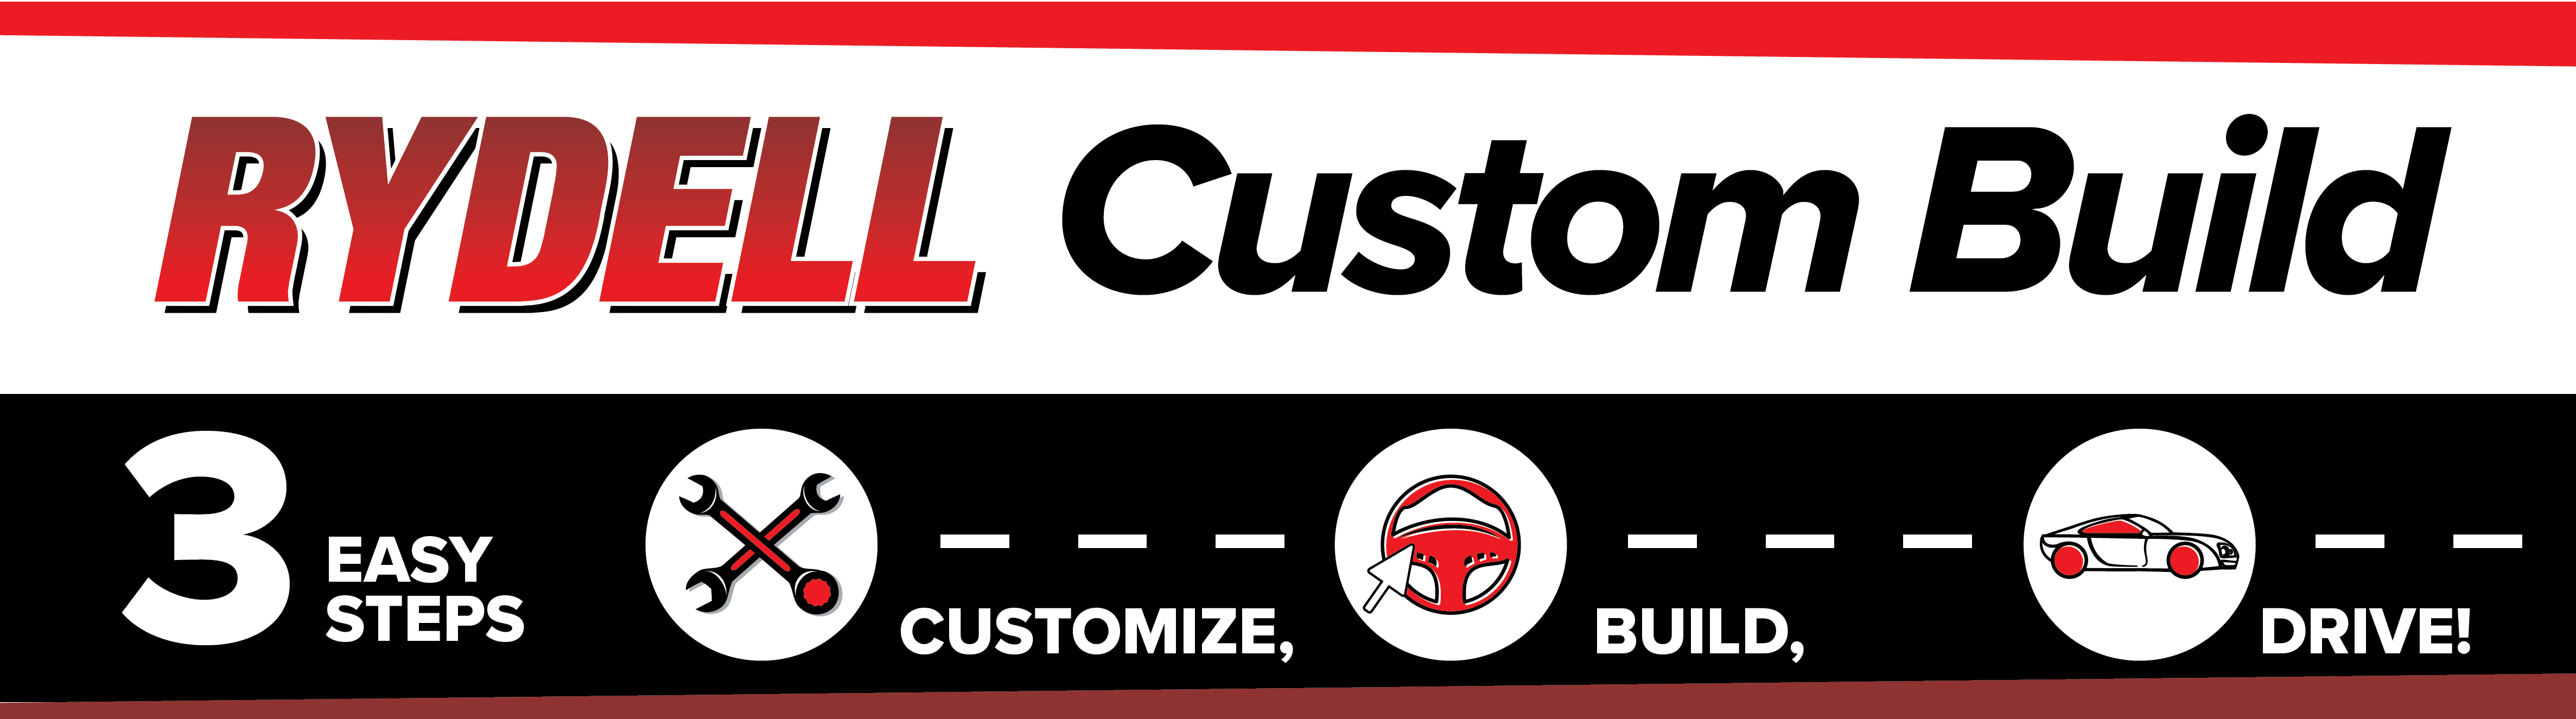 Rydell Custom Build - Not finding the new vehicle you want? Utilize Rydell Custom Build for an easy and stress-free way to get the exact vehicle you’ve been looking for!